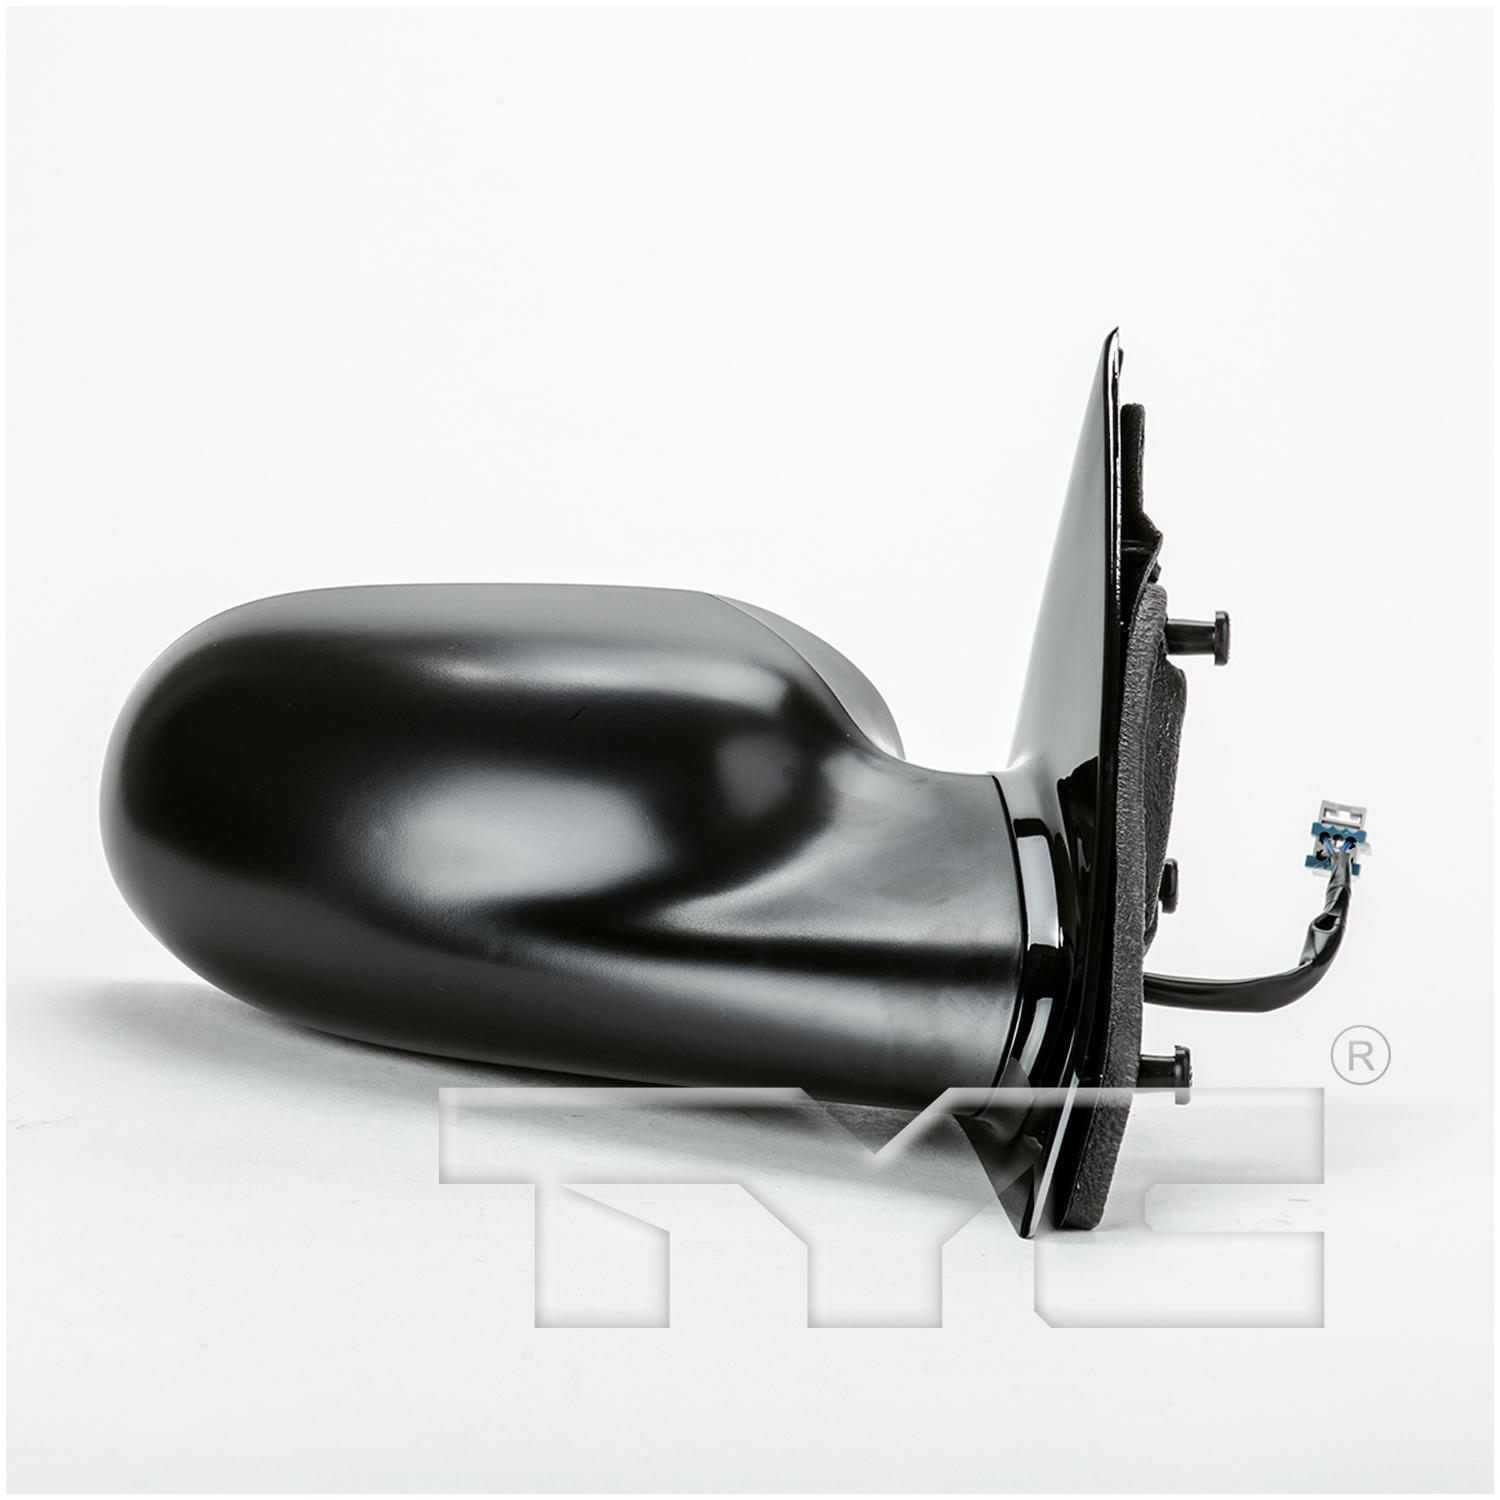 Aftermarket MIRRORS for SATURN - LW2, LW2,00-00,RT Mirror outside rear view